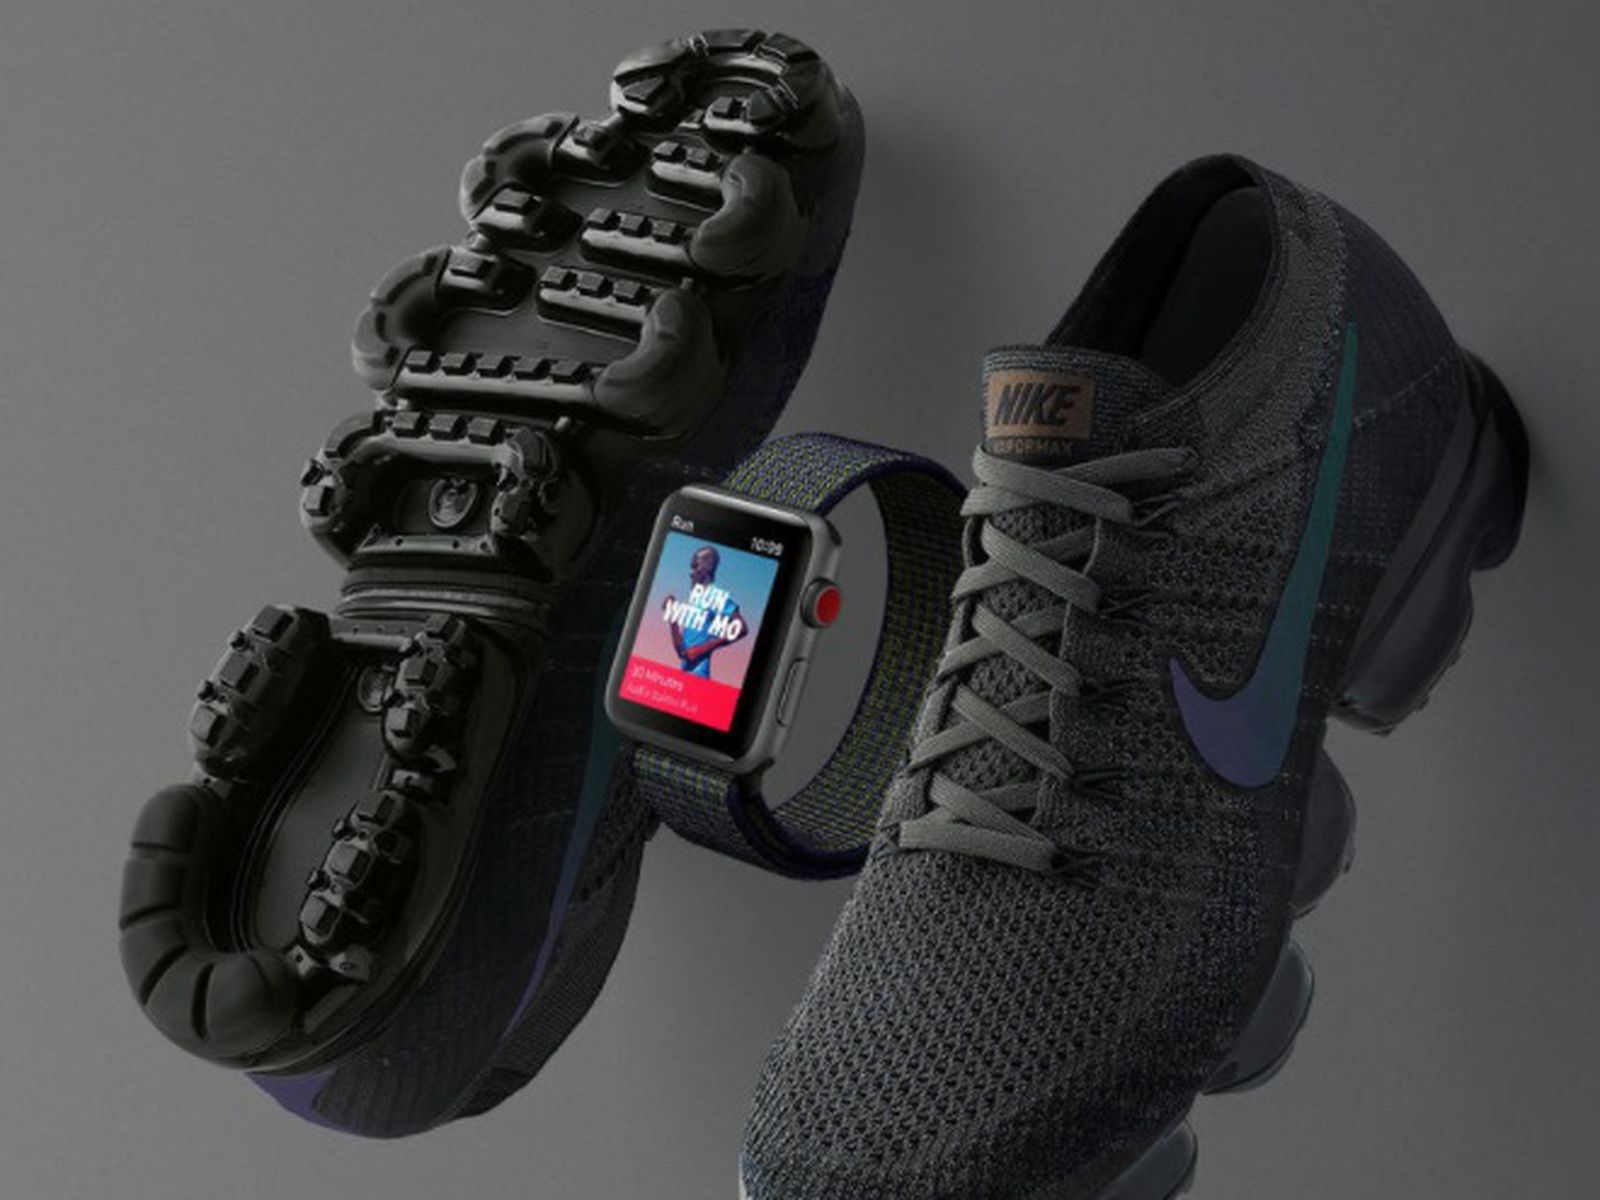 Apple Watch Nike+ Series 3 Available With New Midnight Fog Band 